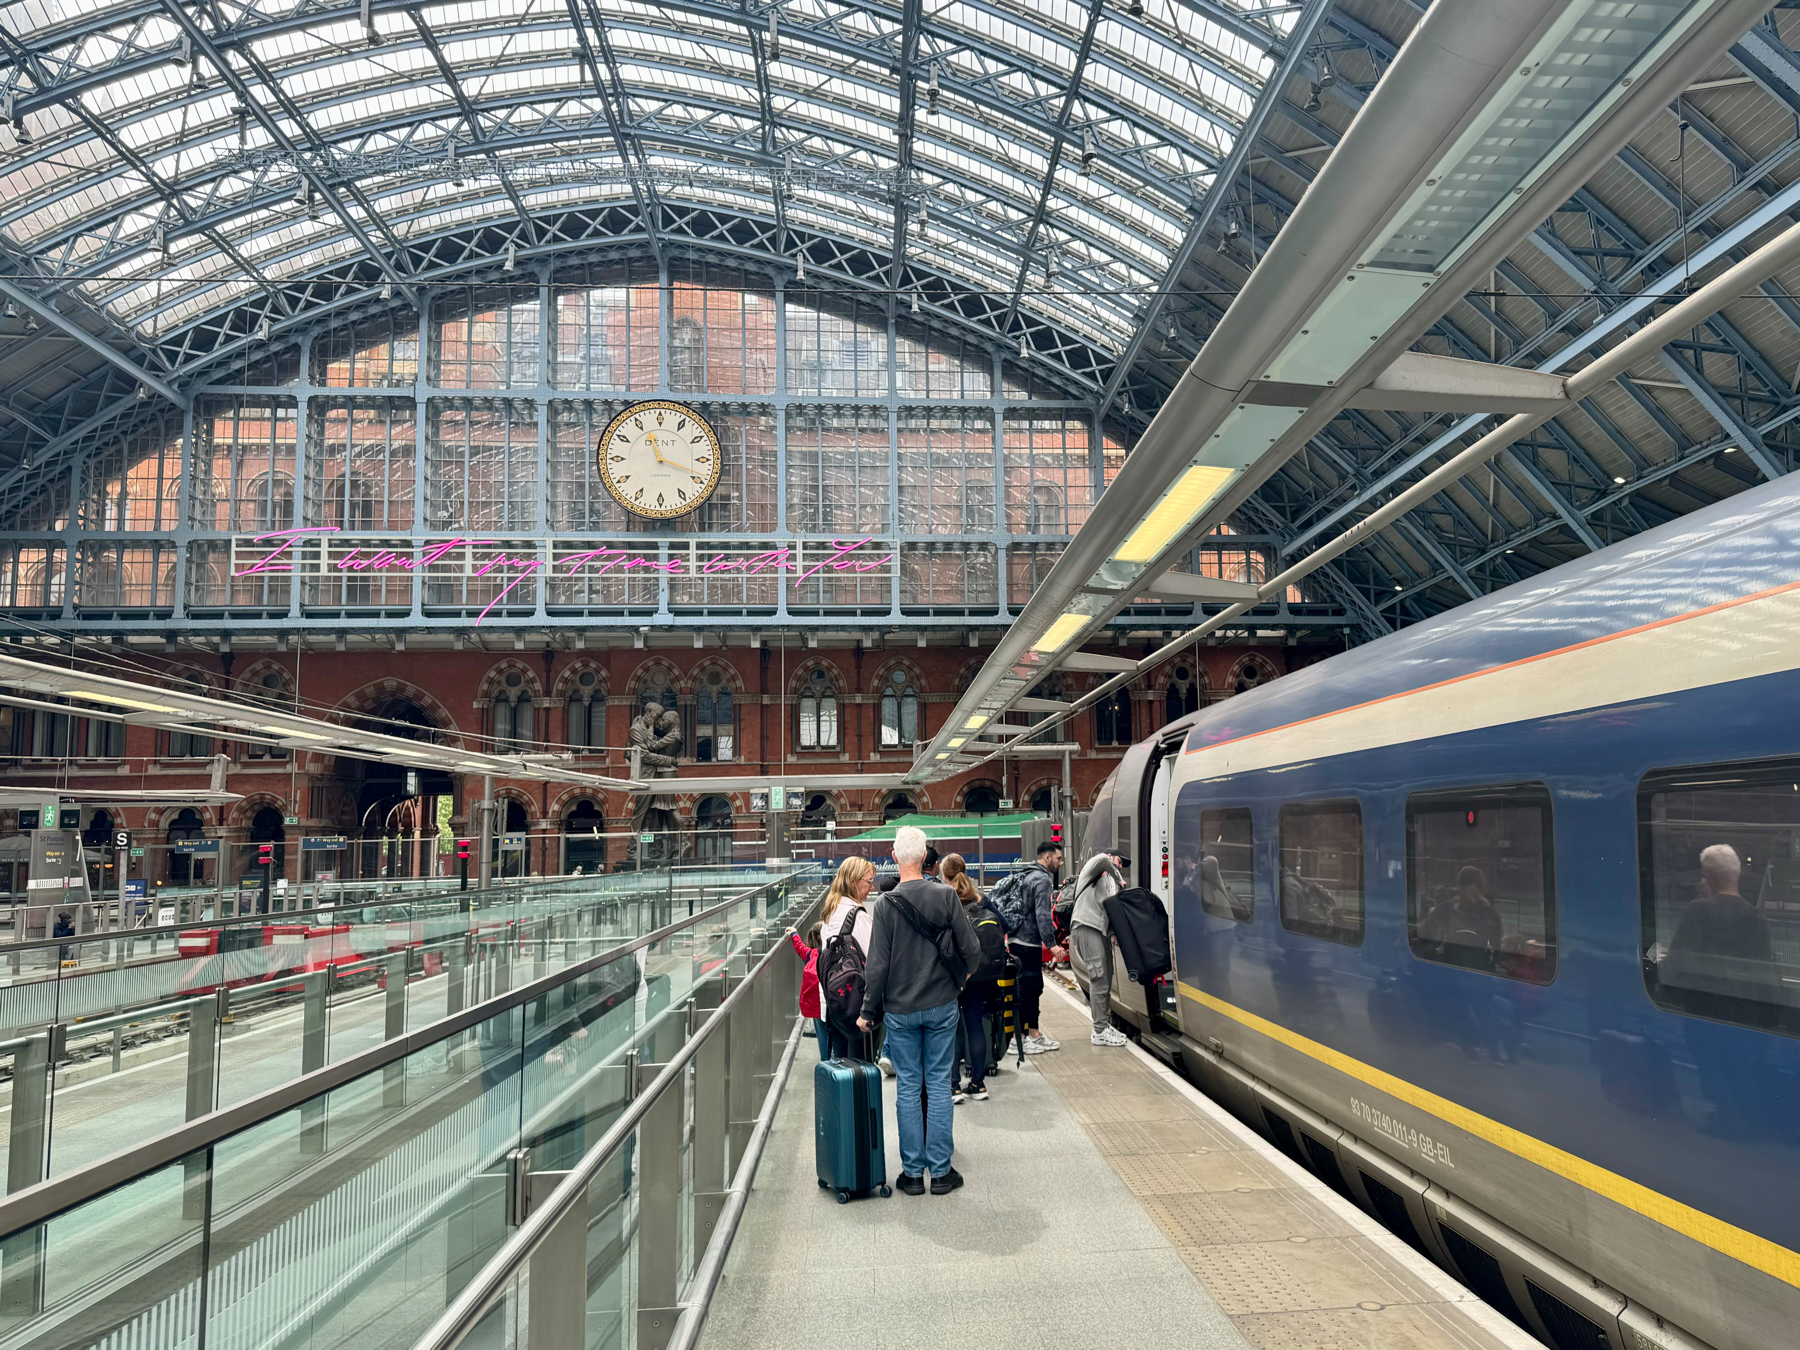 The image shows the St. Pancras train station platform with people boarding a blue train. The station has a large, intricate arched roof made of steel and glass. A clock is prominently displayed above an entrance with a neon sign beneath it.